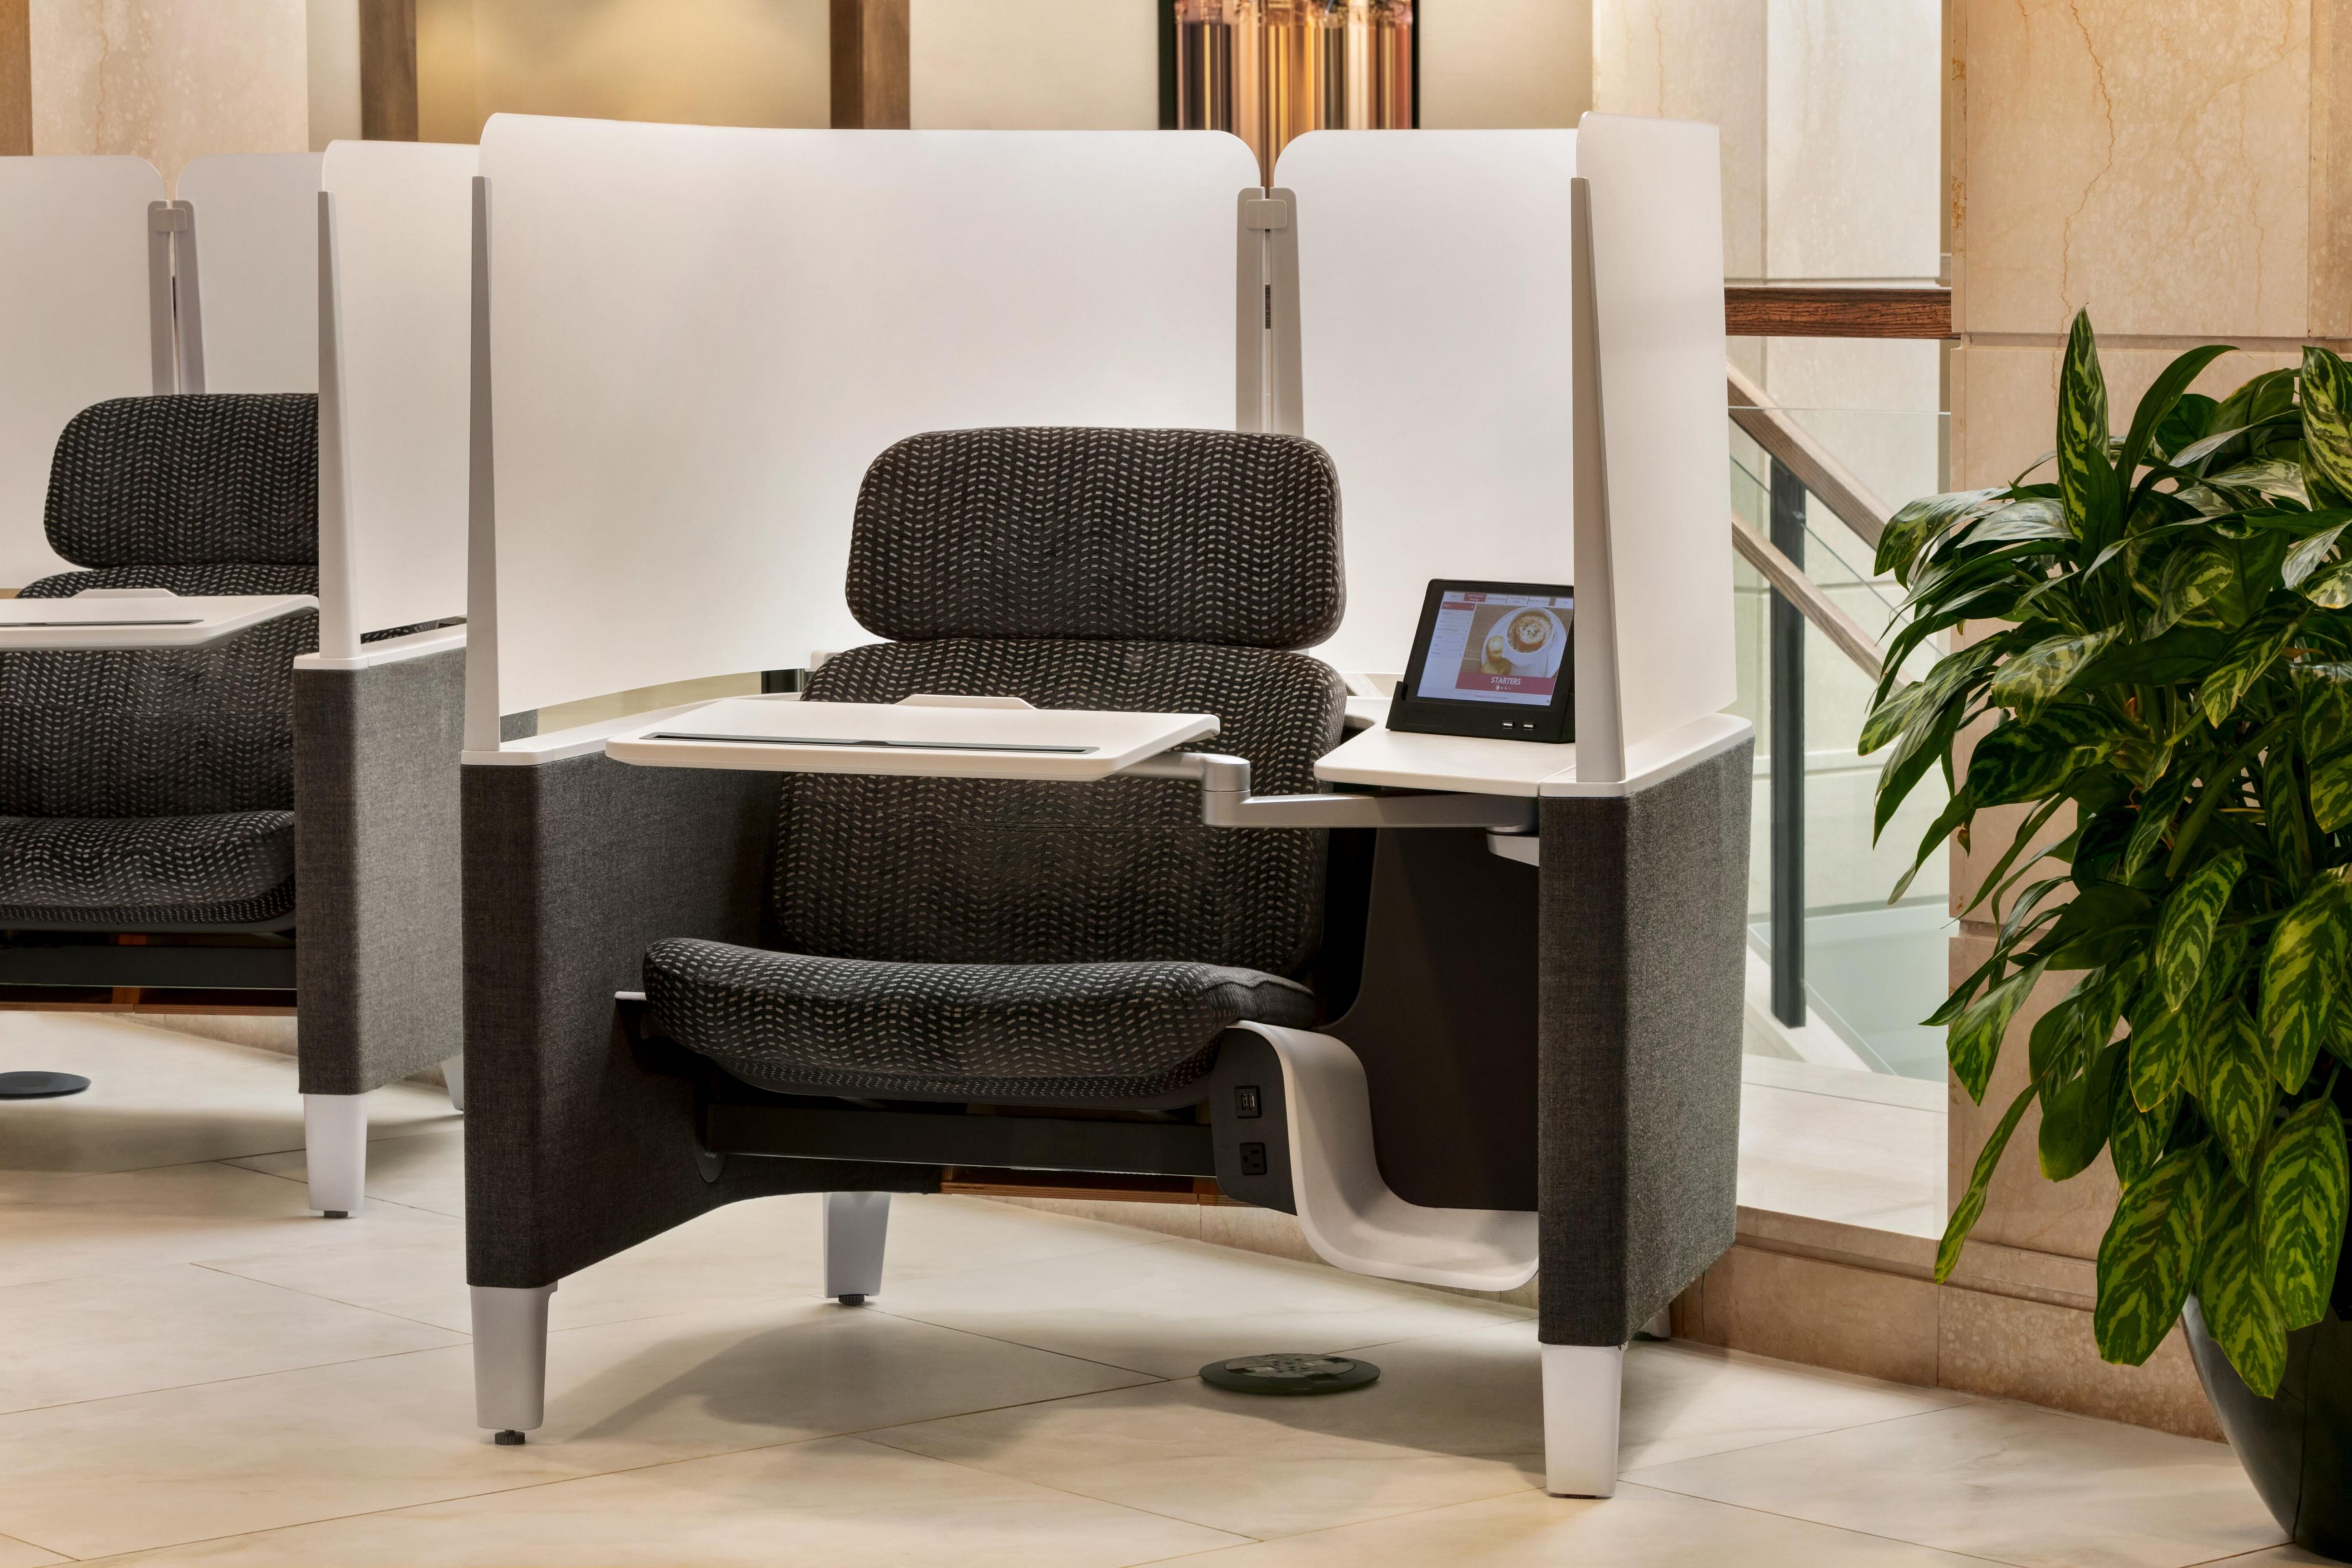 Order a drink while you work from the privacy of our new work pods